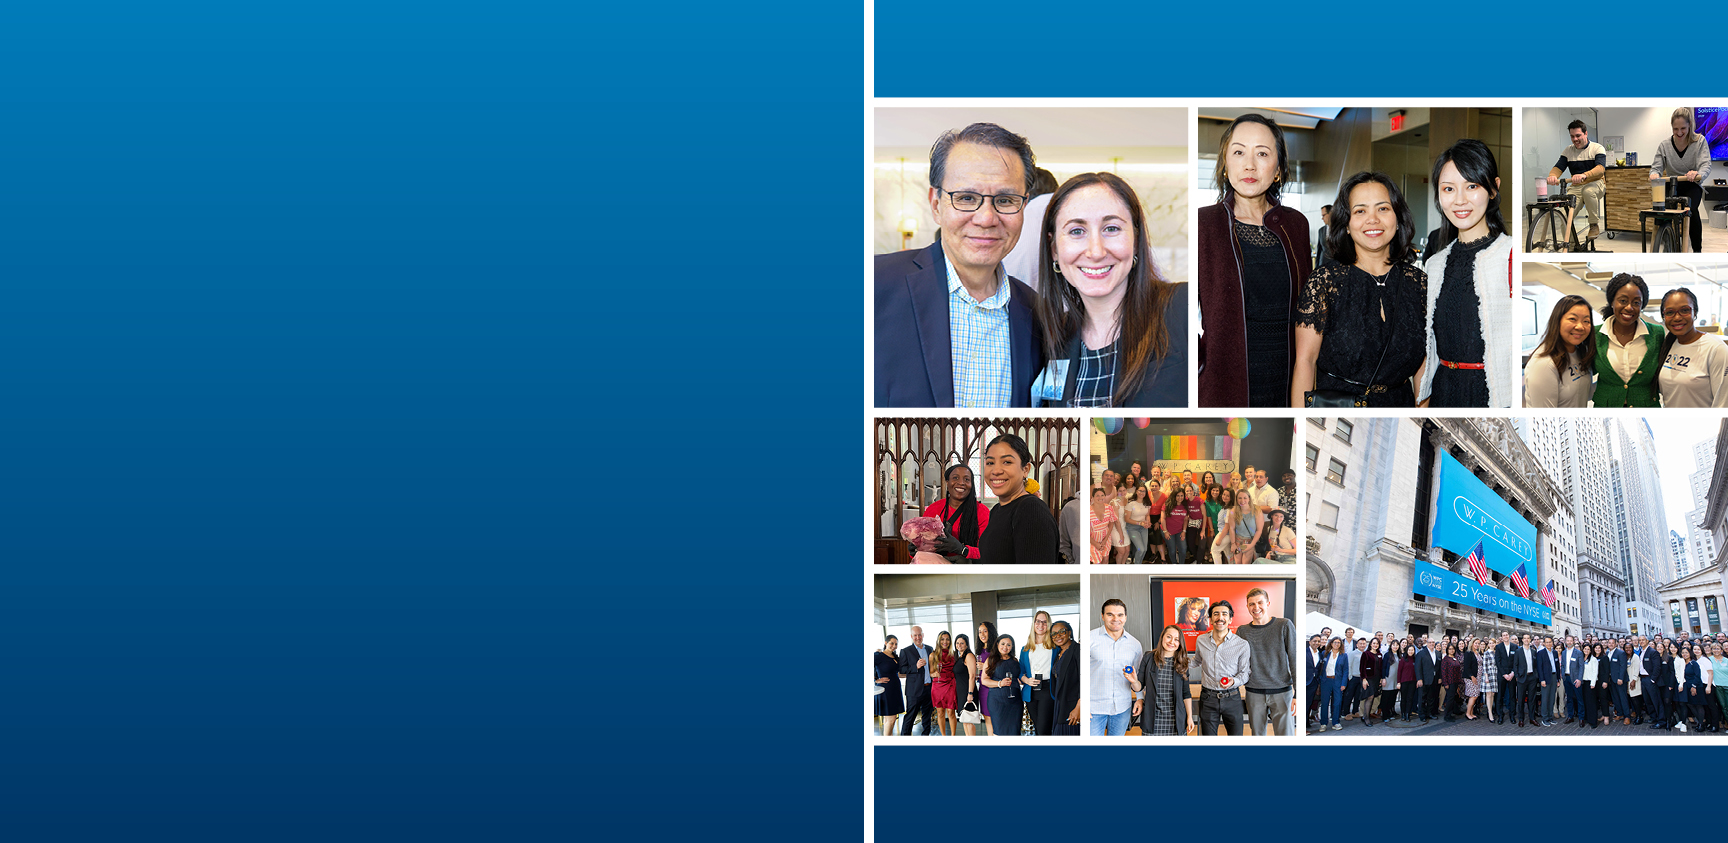 A collage featuring 9 photos of W. P. Carey employees at company events, with a navy fade block on the left-hand side of the graphic.